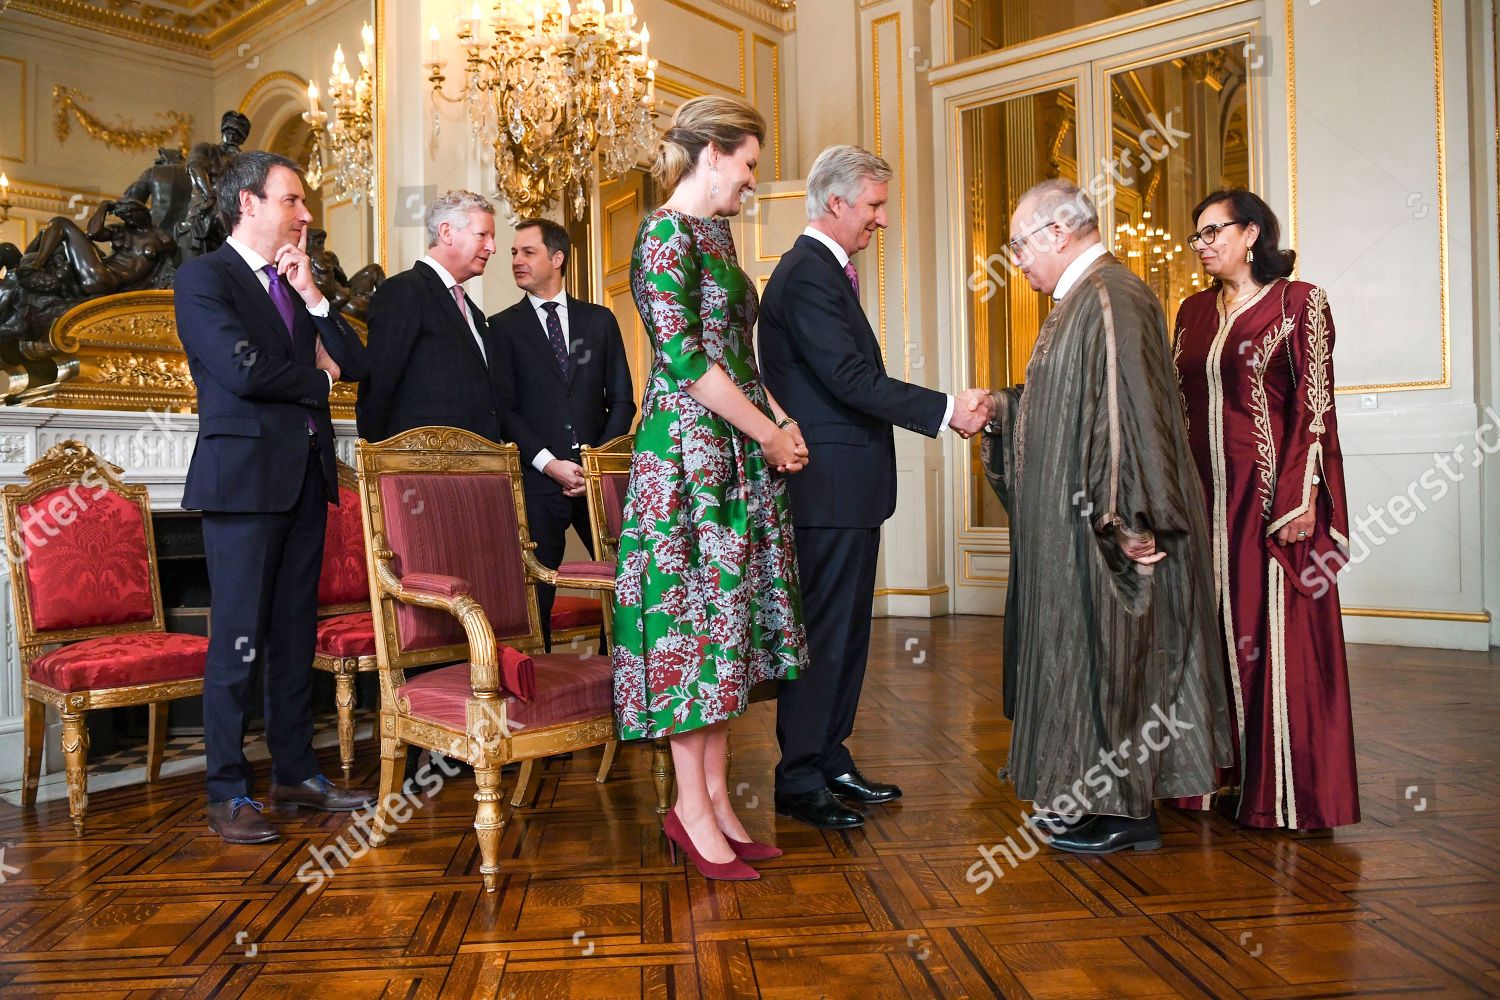 CASA REAL BELGA - Página 93 King-philippe-and-queen-mathilde-receive-the-heads-of-diplomatic-missions-brussels-belgium-shutterstock-editorial-10525487h